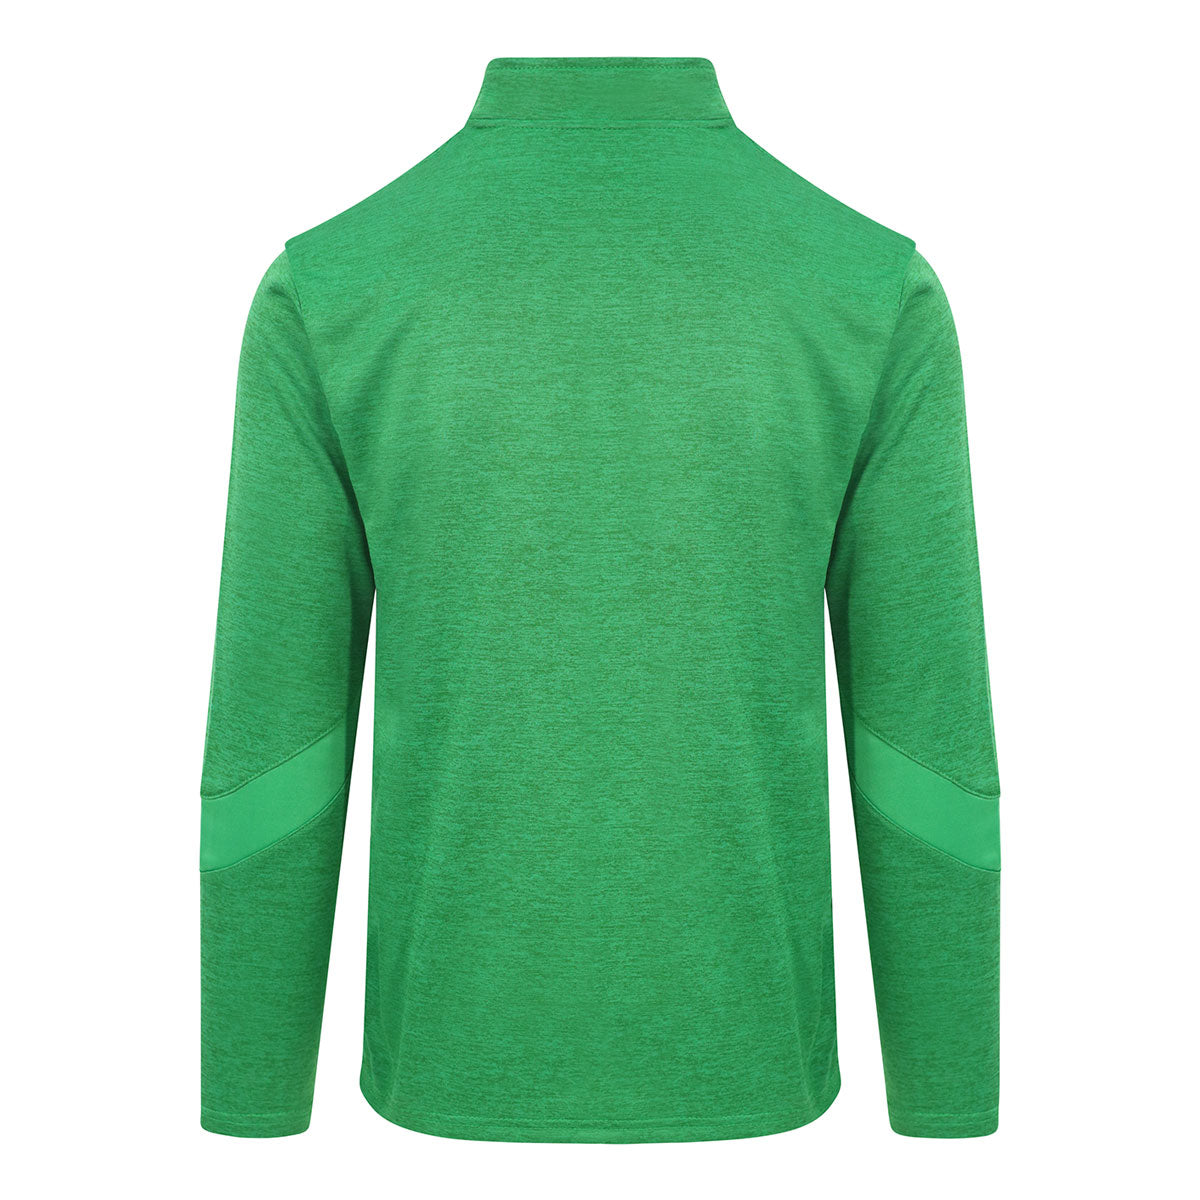 Mc Keever Wolfe Tones Na Sionna, Clare Core 22 1/4 Zip Top - Adult - Green